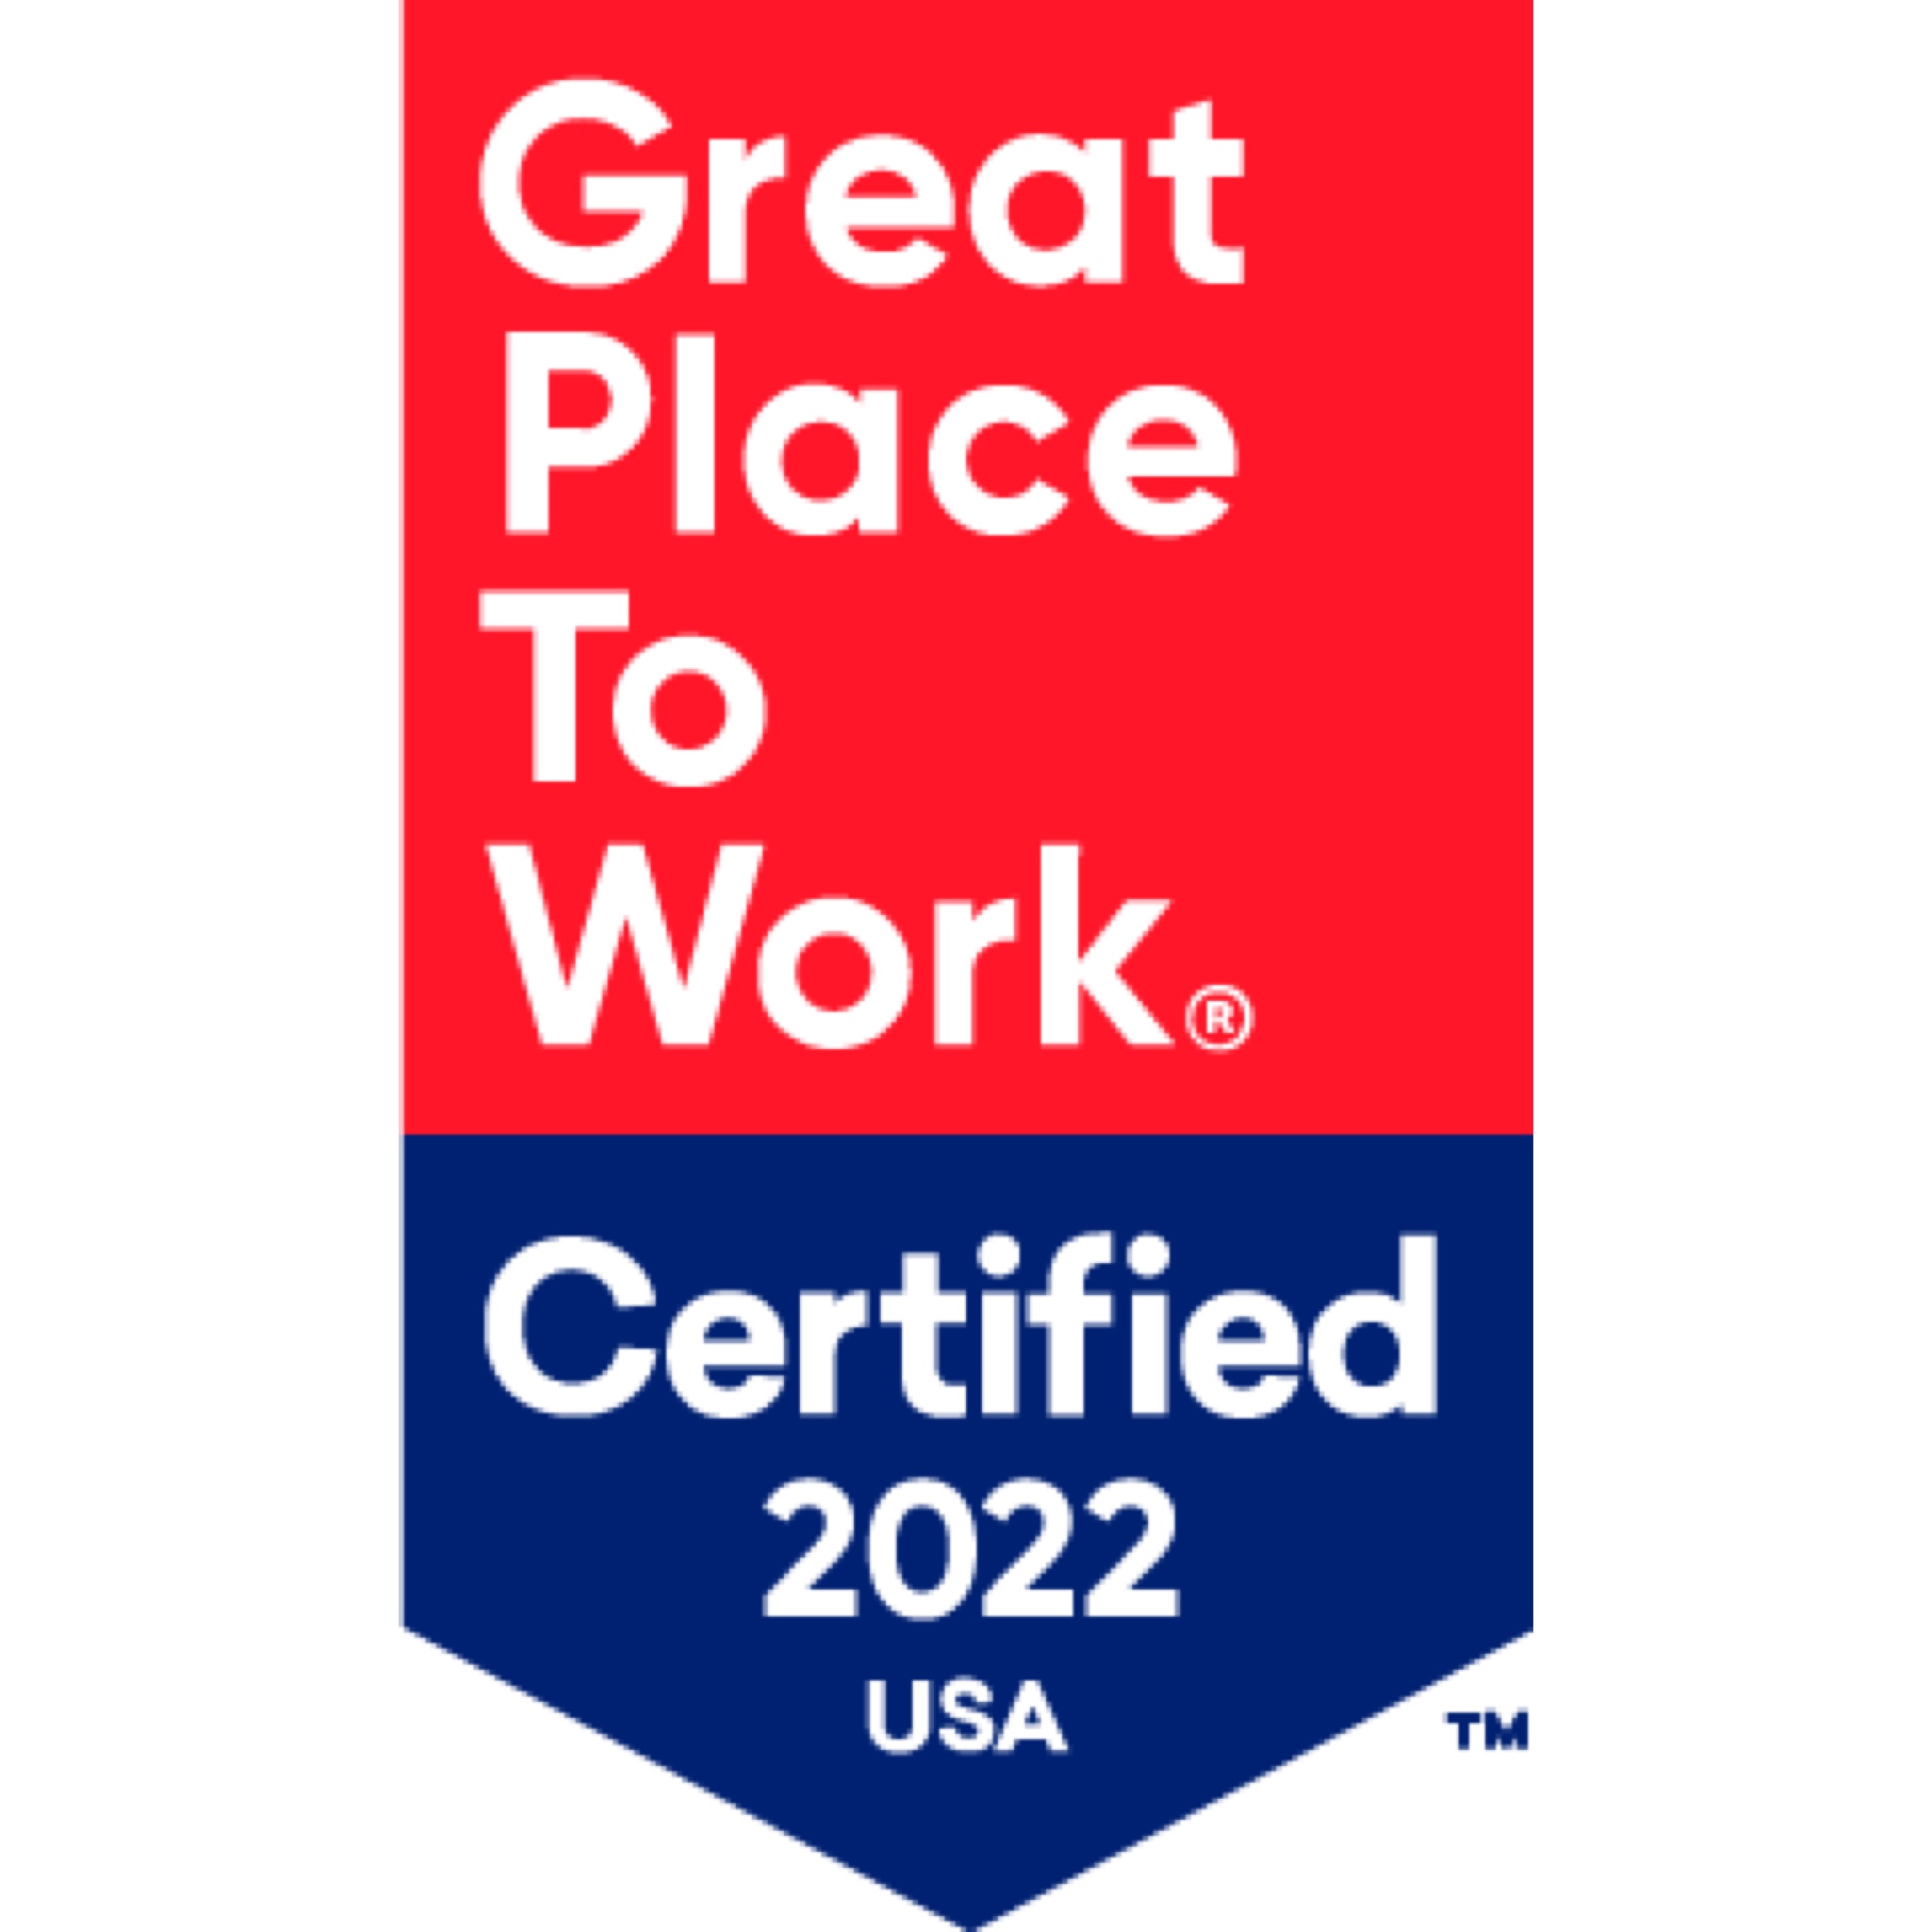 United StatesのエージェンシーAltered State ProductionsはGreat Places to Work - Certified 2022 USA賞を獲得しています